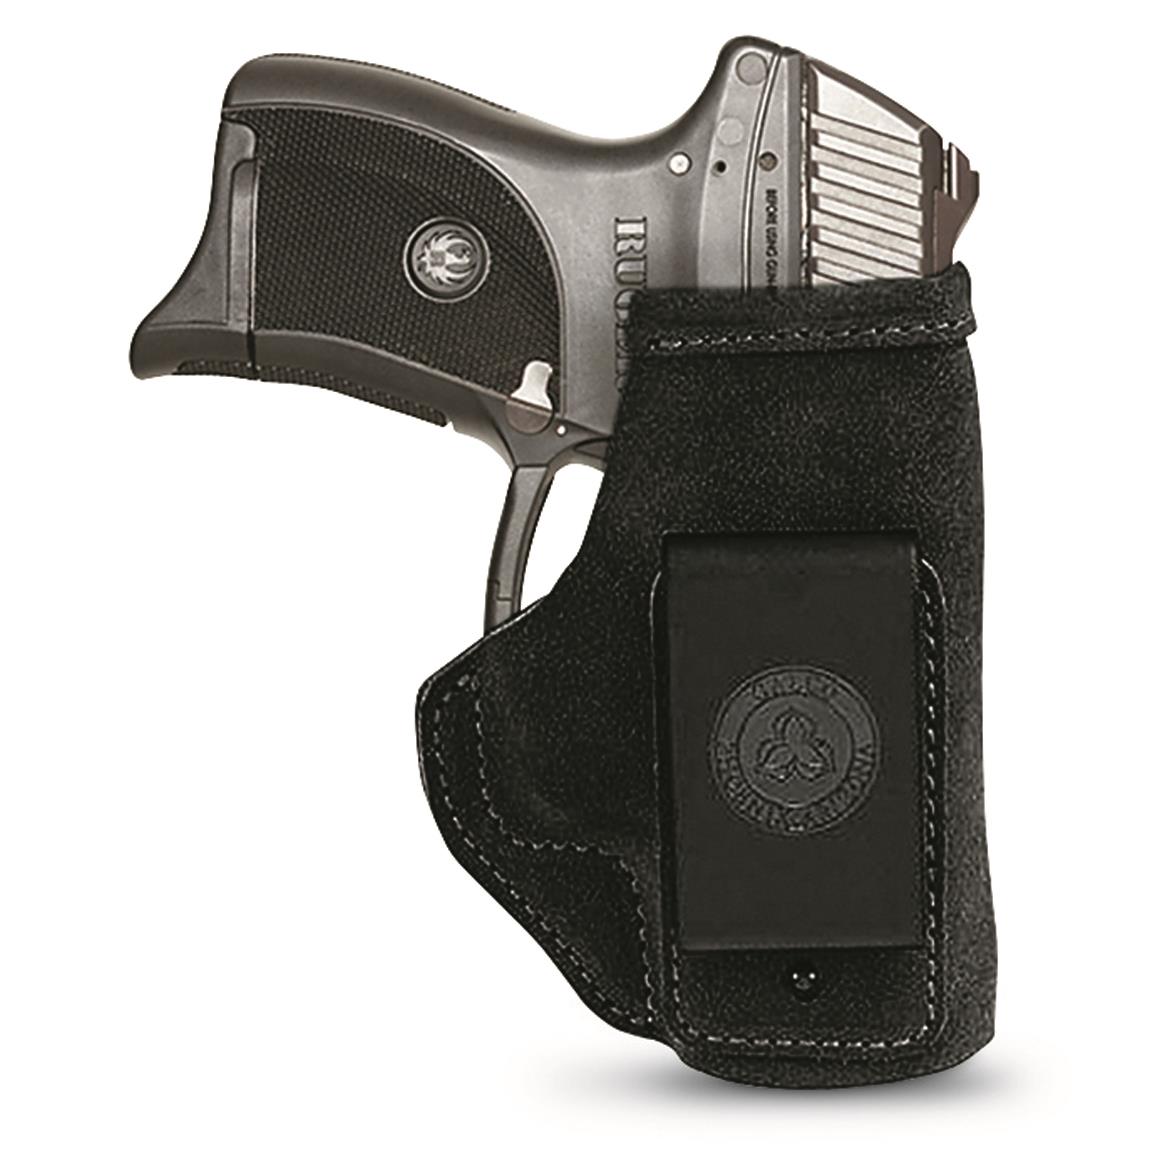 Viridian Stow-n-Go IWB Holster for Ruger LC9/LC380